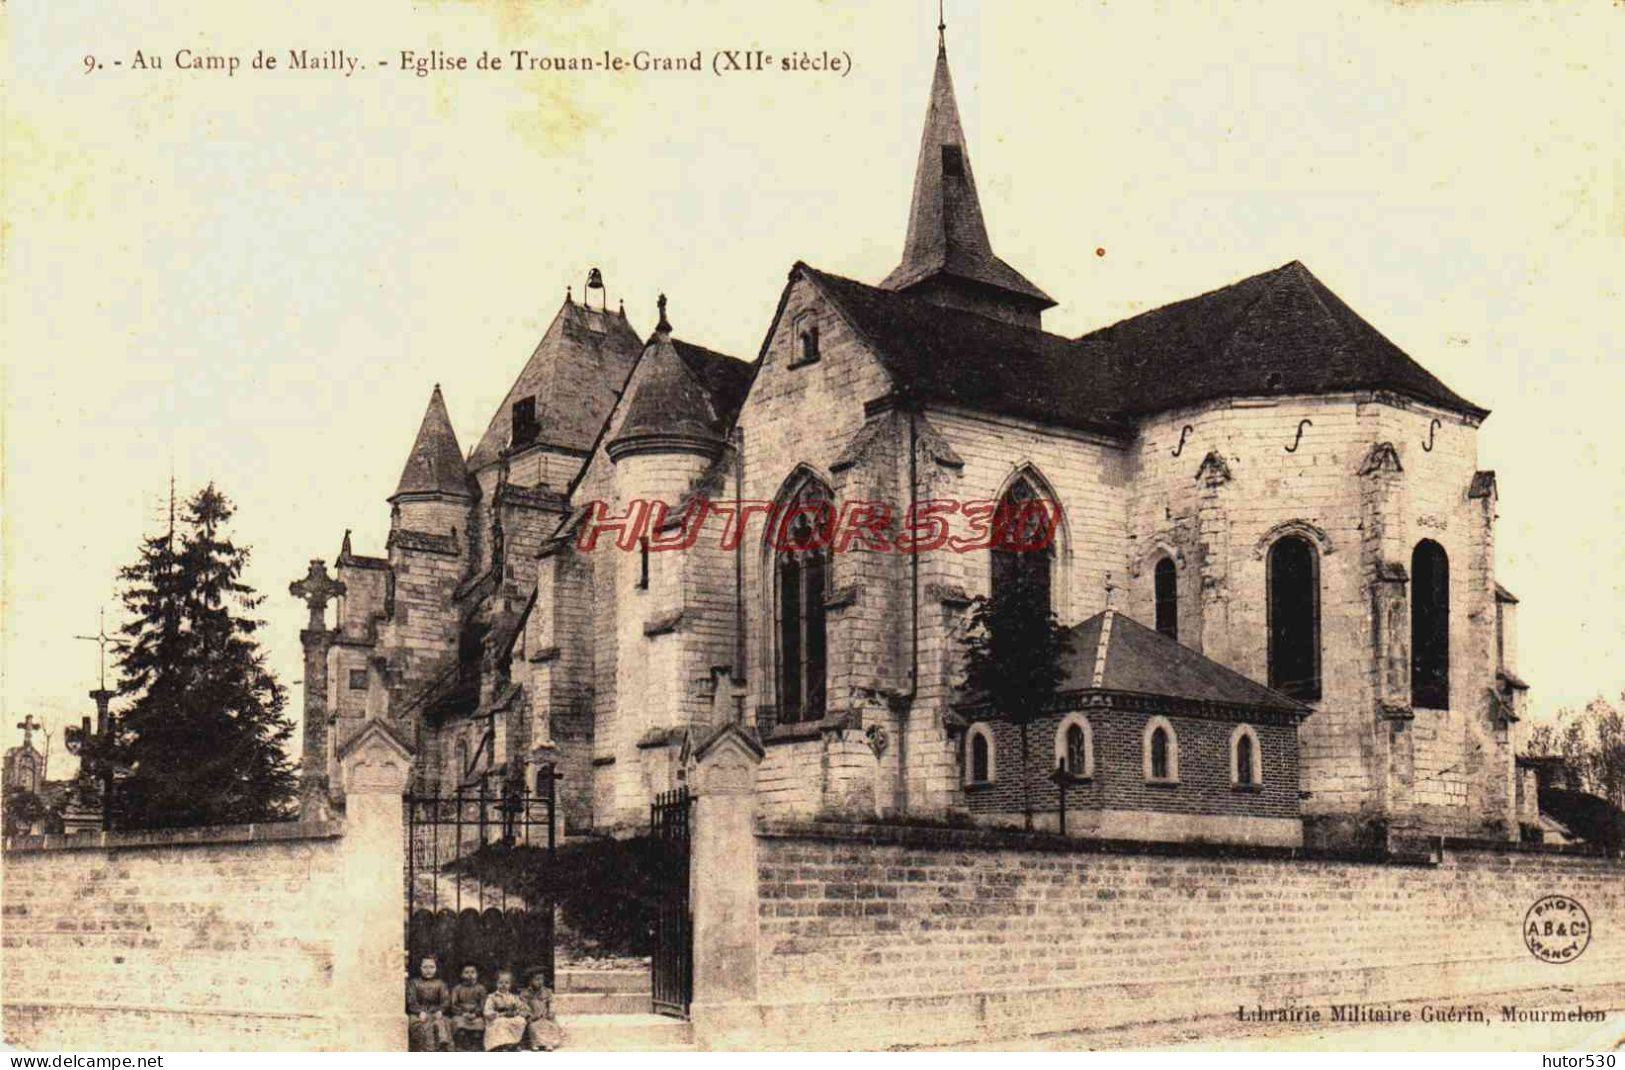 CPA MAILLY LE CAMP - EGLISE DE TROUAN LE GRAND - Mailly-le-Camp